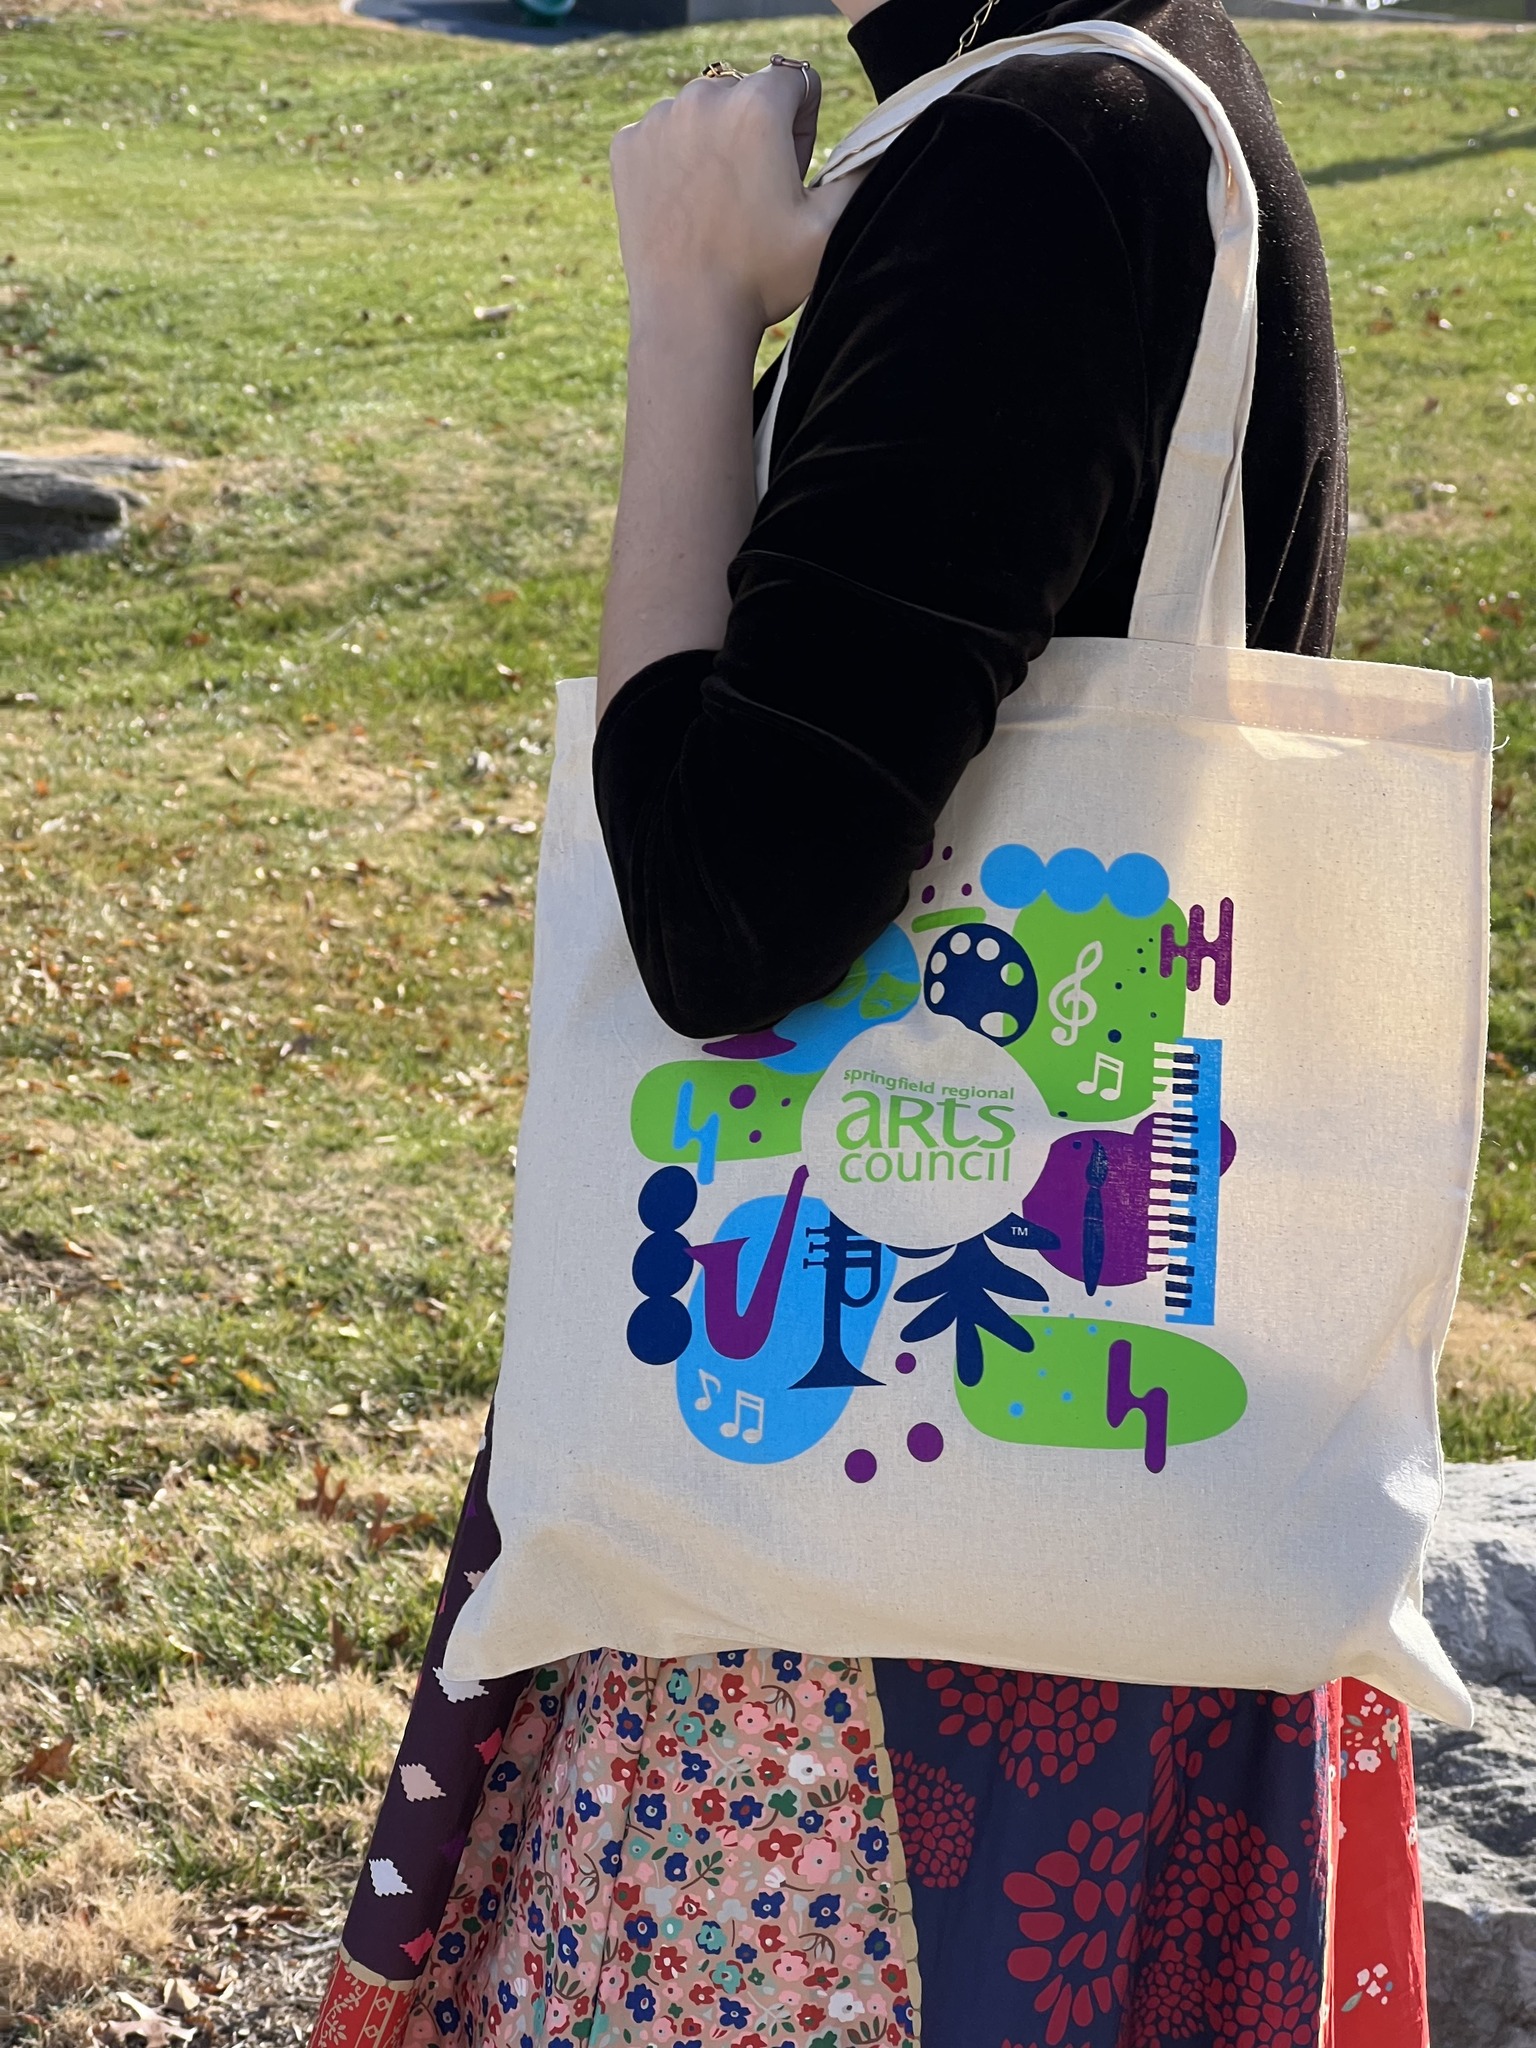 A person wears a canvas tote bag on their left shoulder